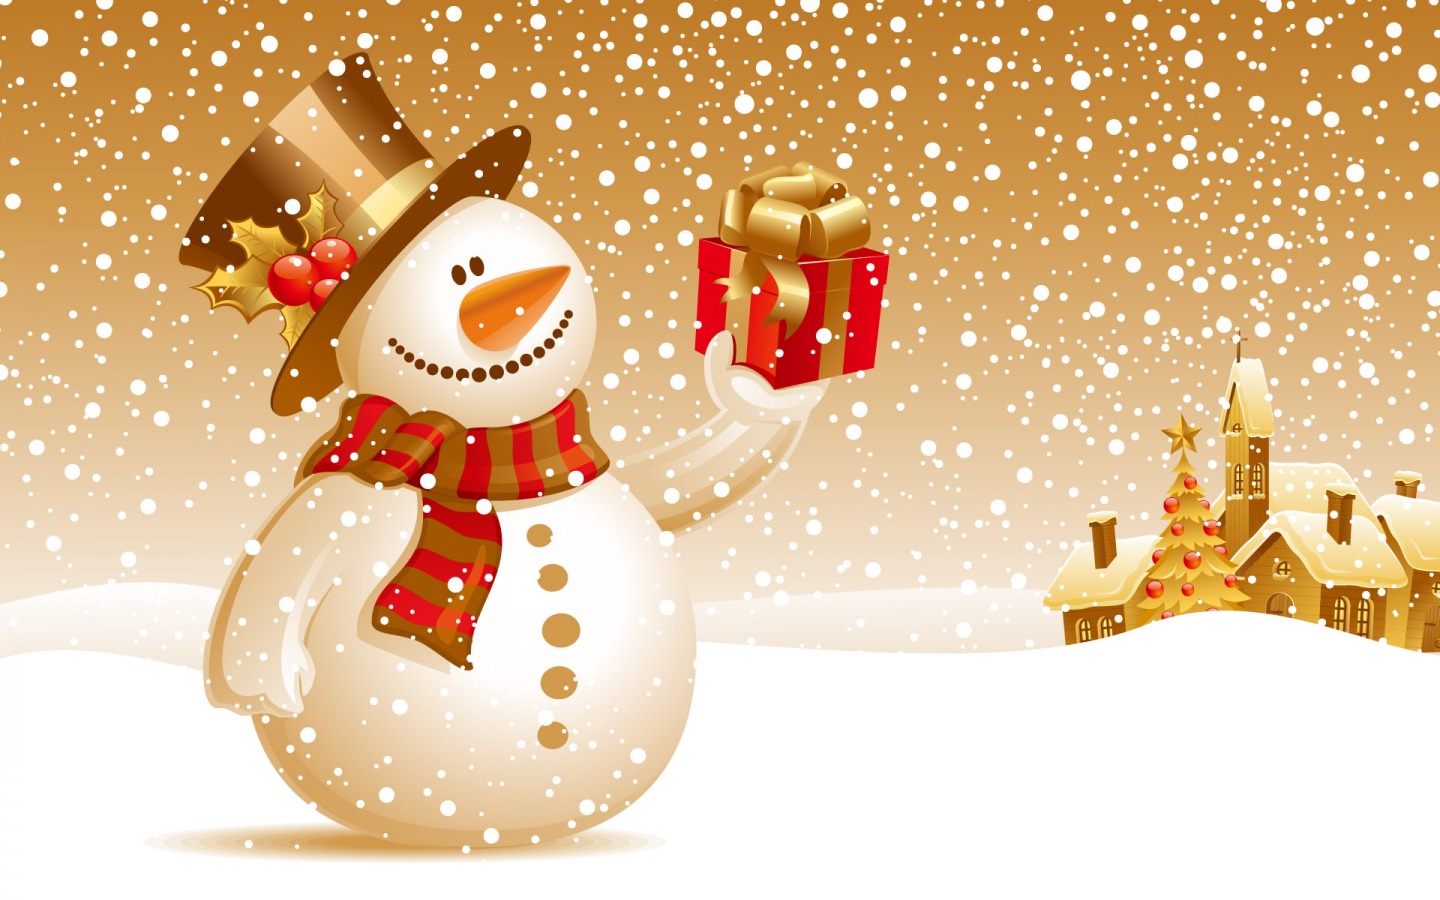 Christmas snowman wallpaper with gifts Background